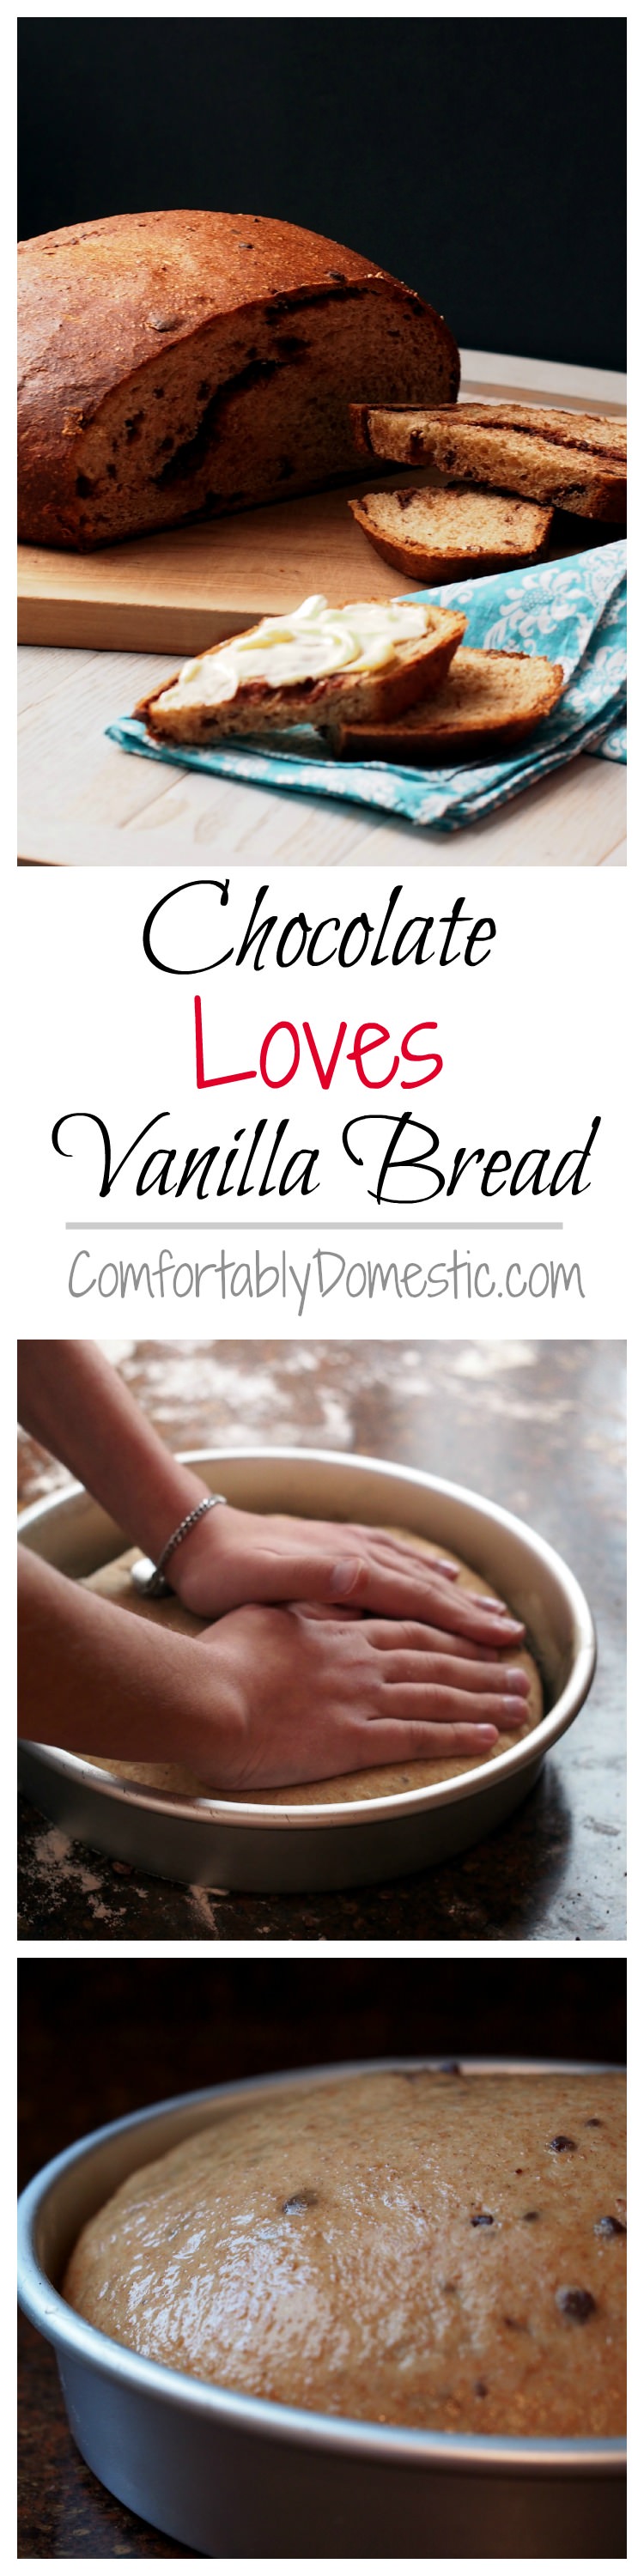 Chocolate Loves Vanilla Bread - Sweet, vanilla-infused whole grain sweet dough with a generous helping of chopped chocolate kneaded into tender loaves. | ComfortablyDomestic.com